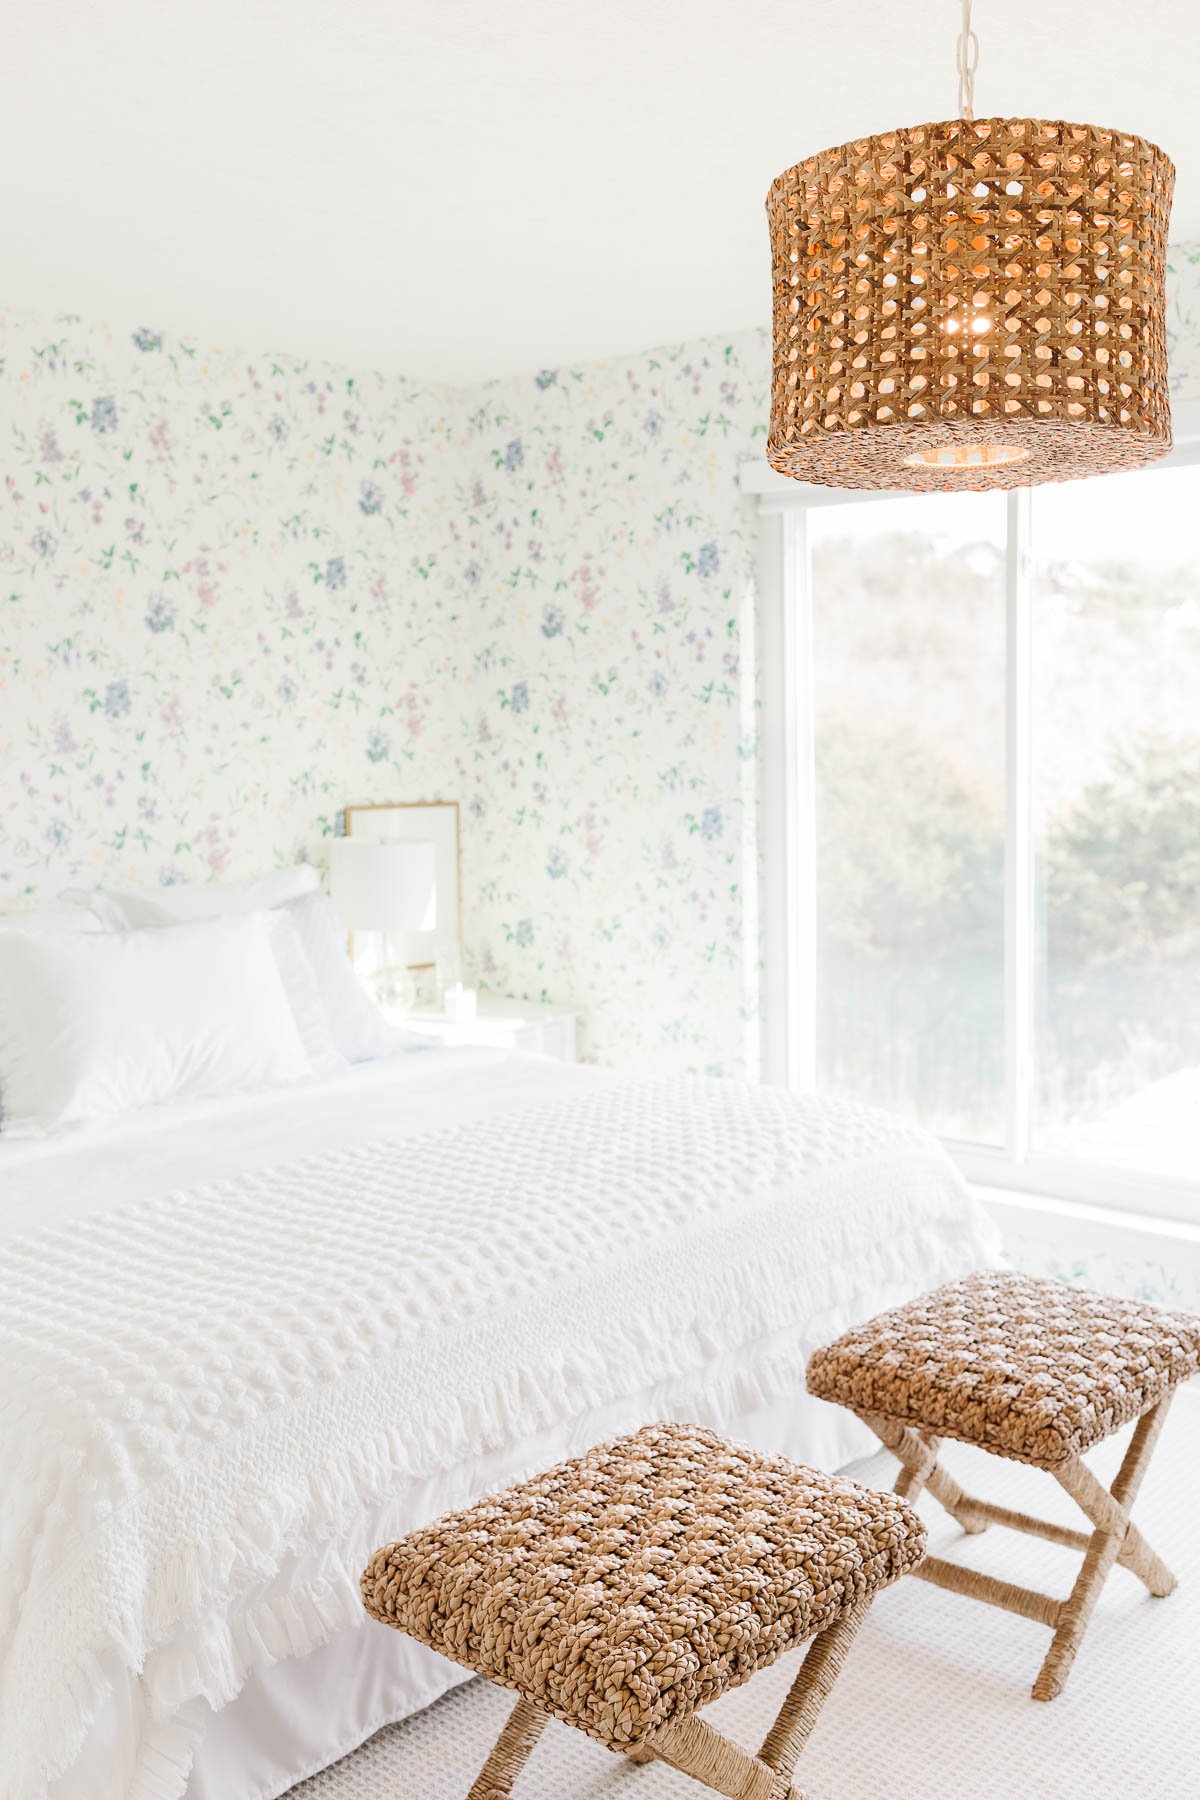 A wallpapered guest bedroom with white bedding and rattan stools.